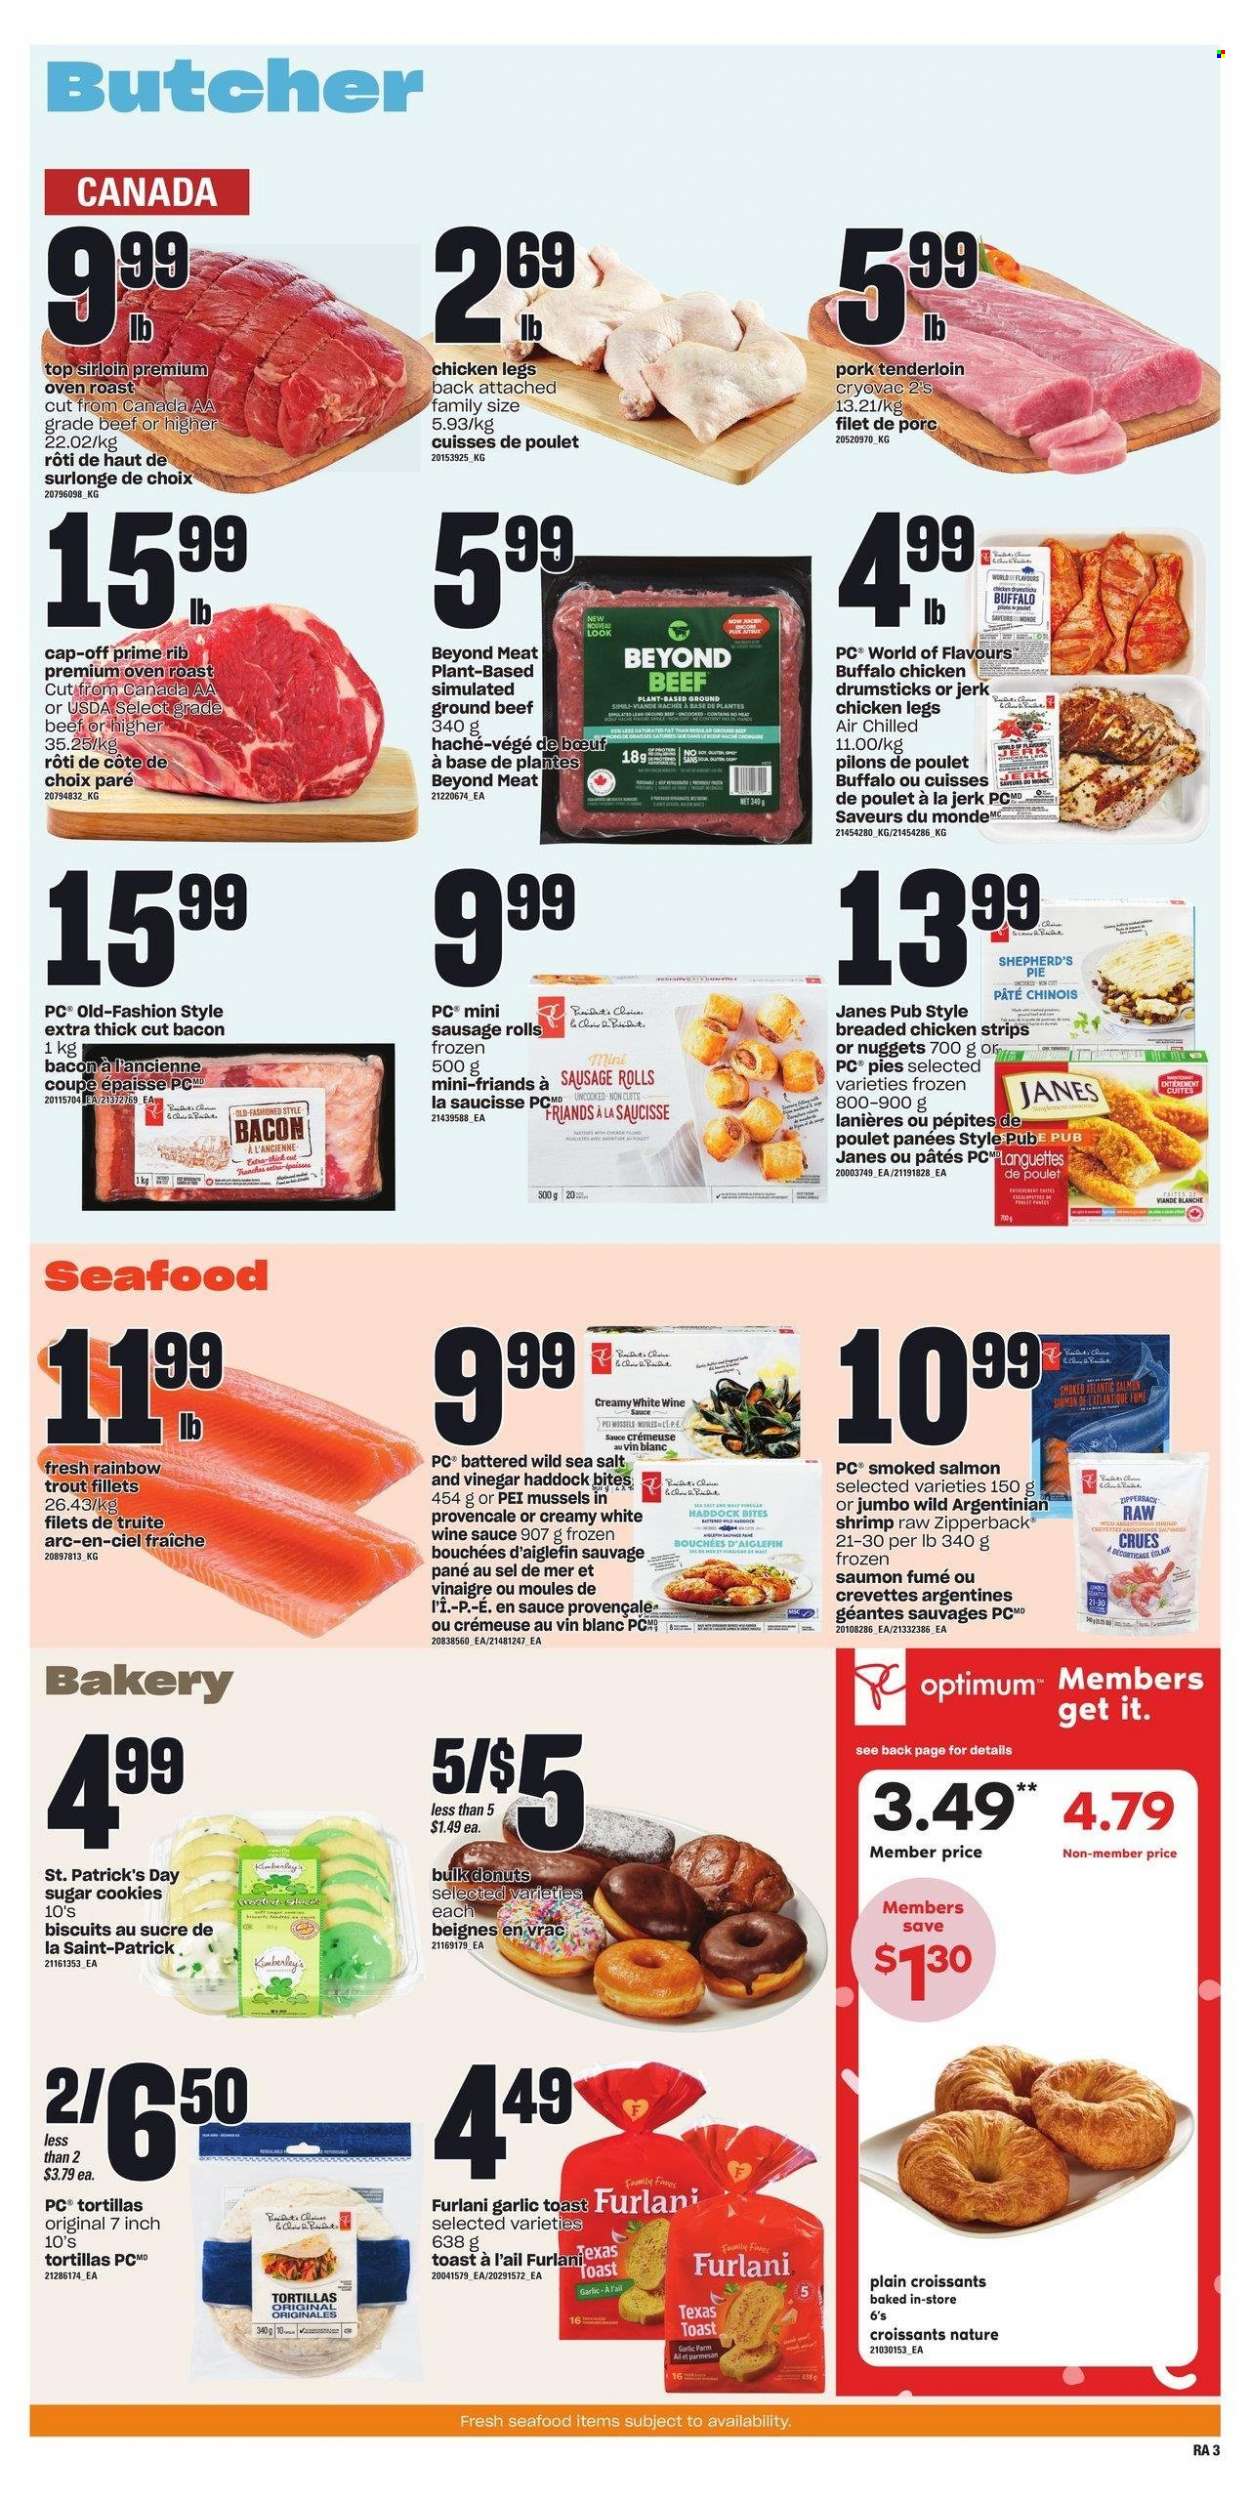 Atlantic Superstore flyer  - March 16, 2023 - March 22, 2023.